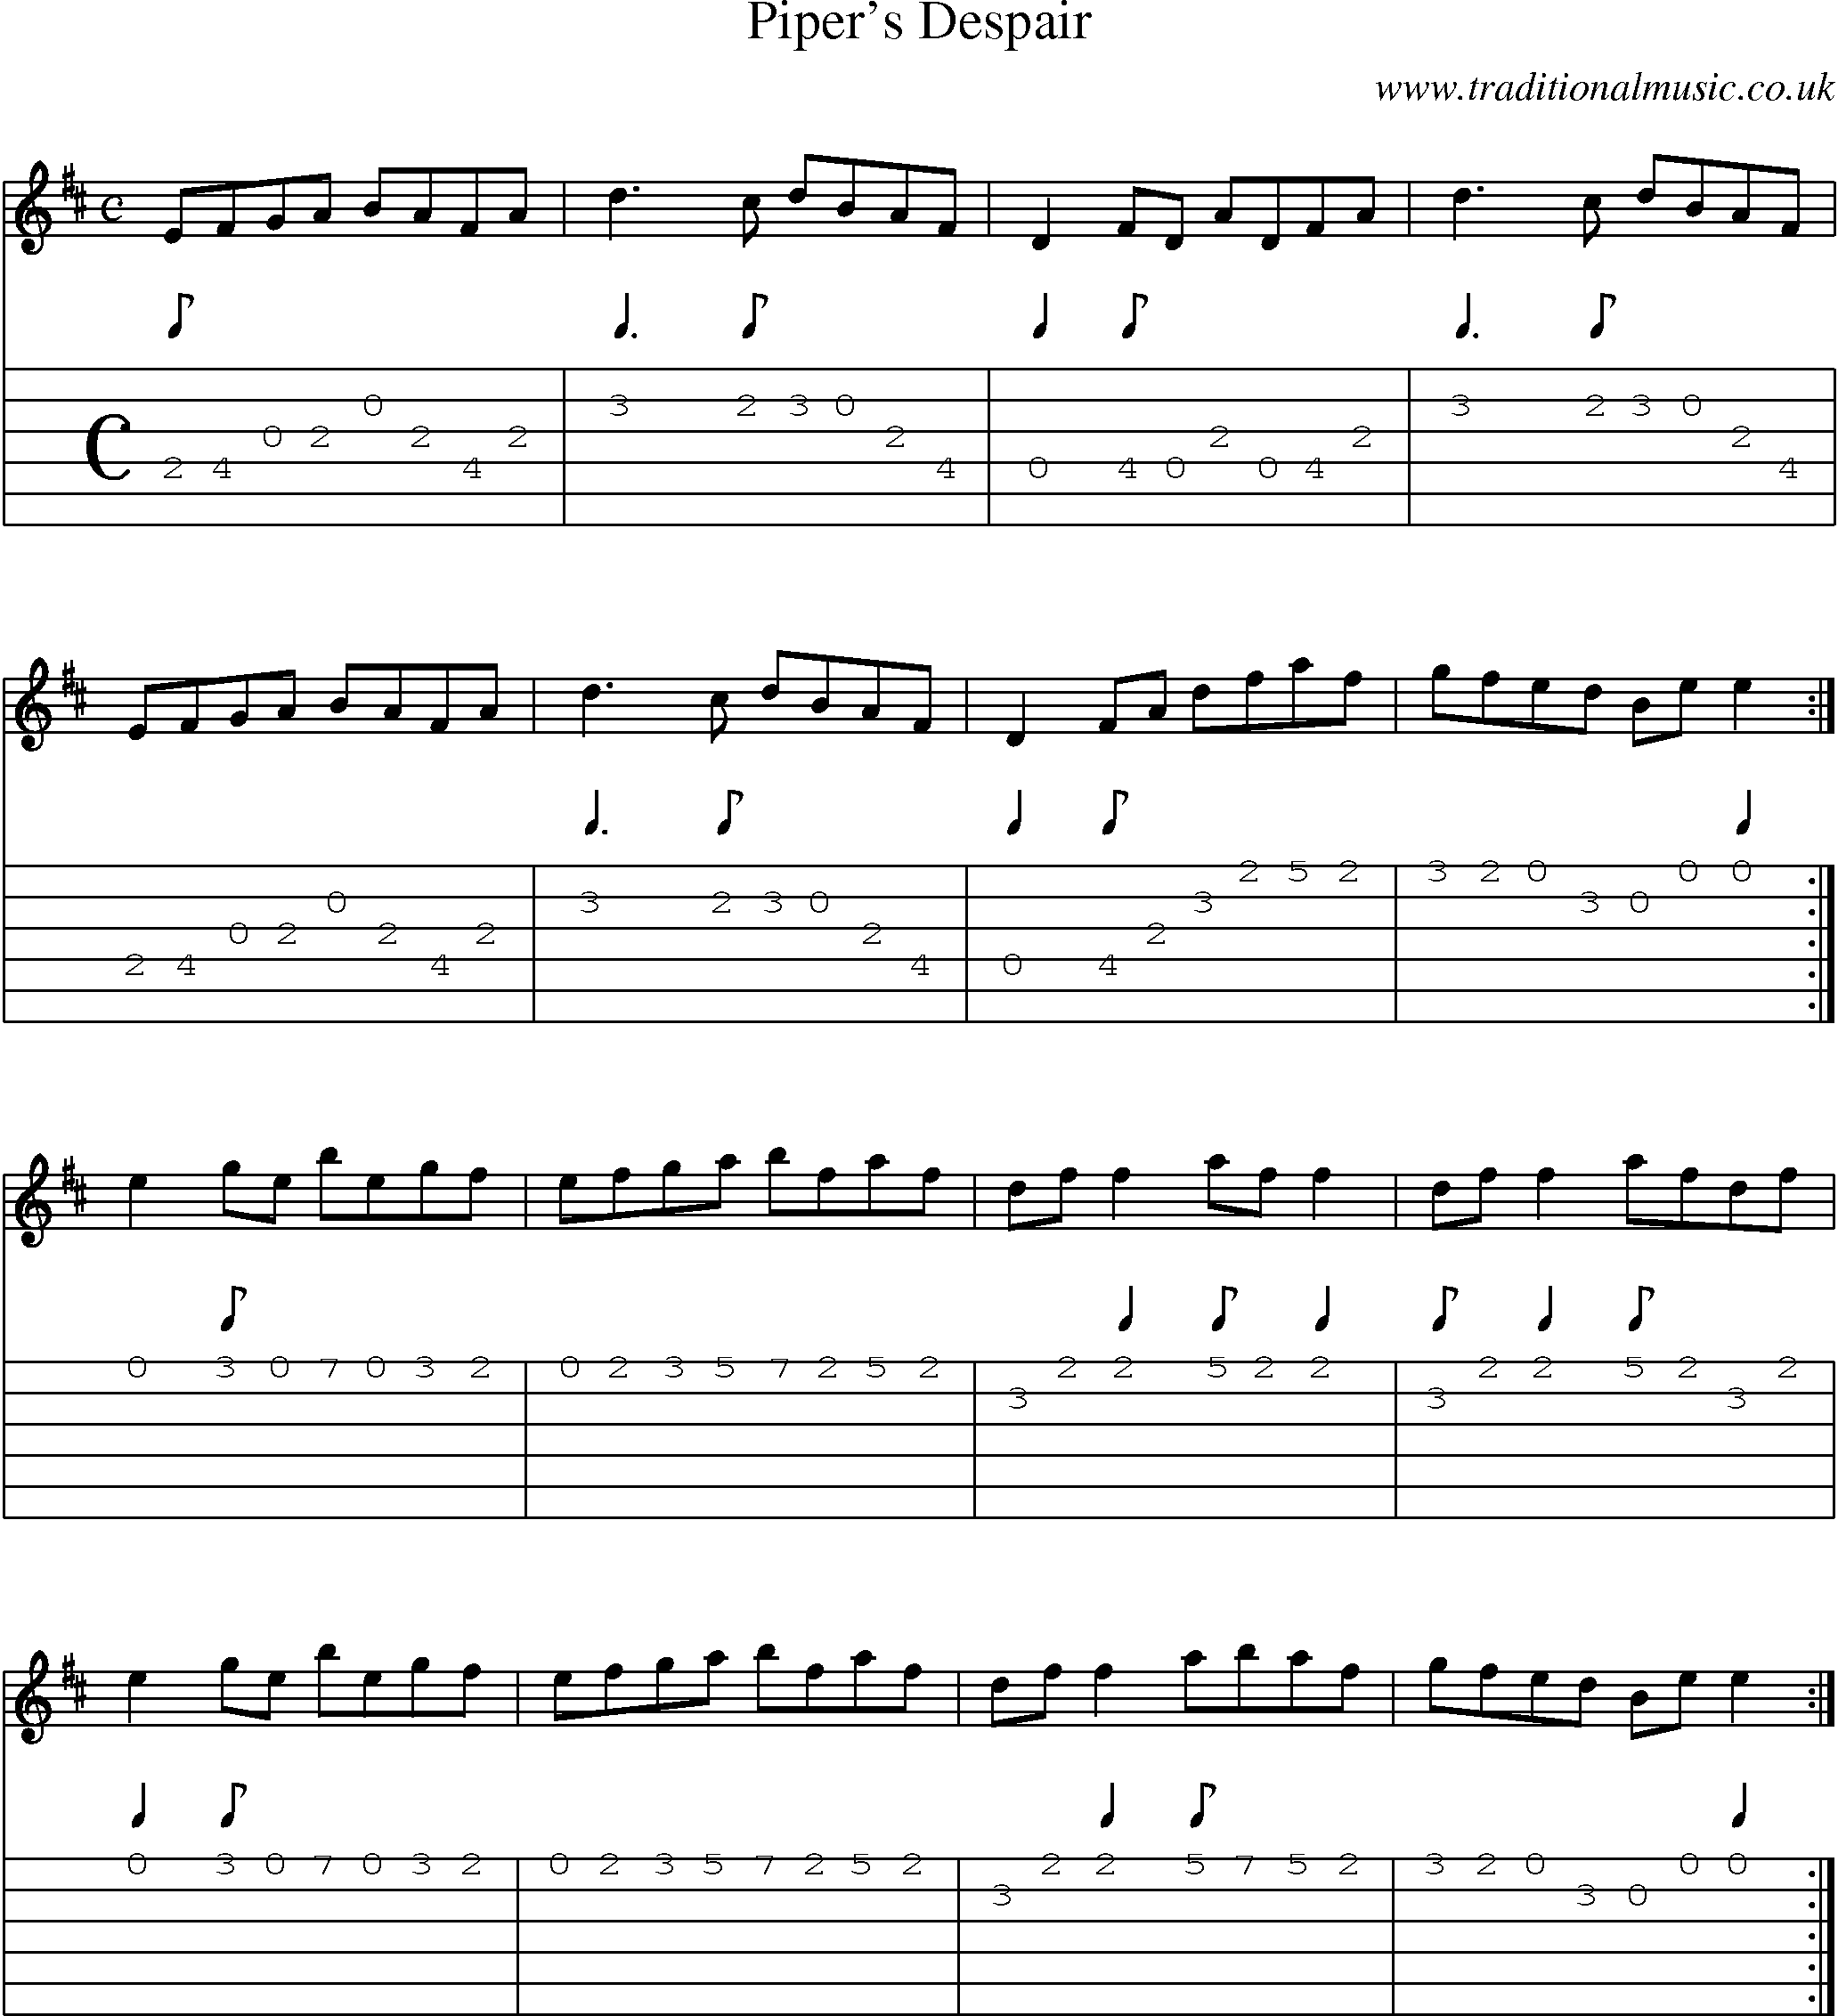 Music Score and Guitar Tabs for Pipers Despair